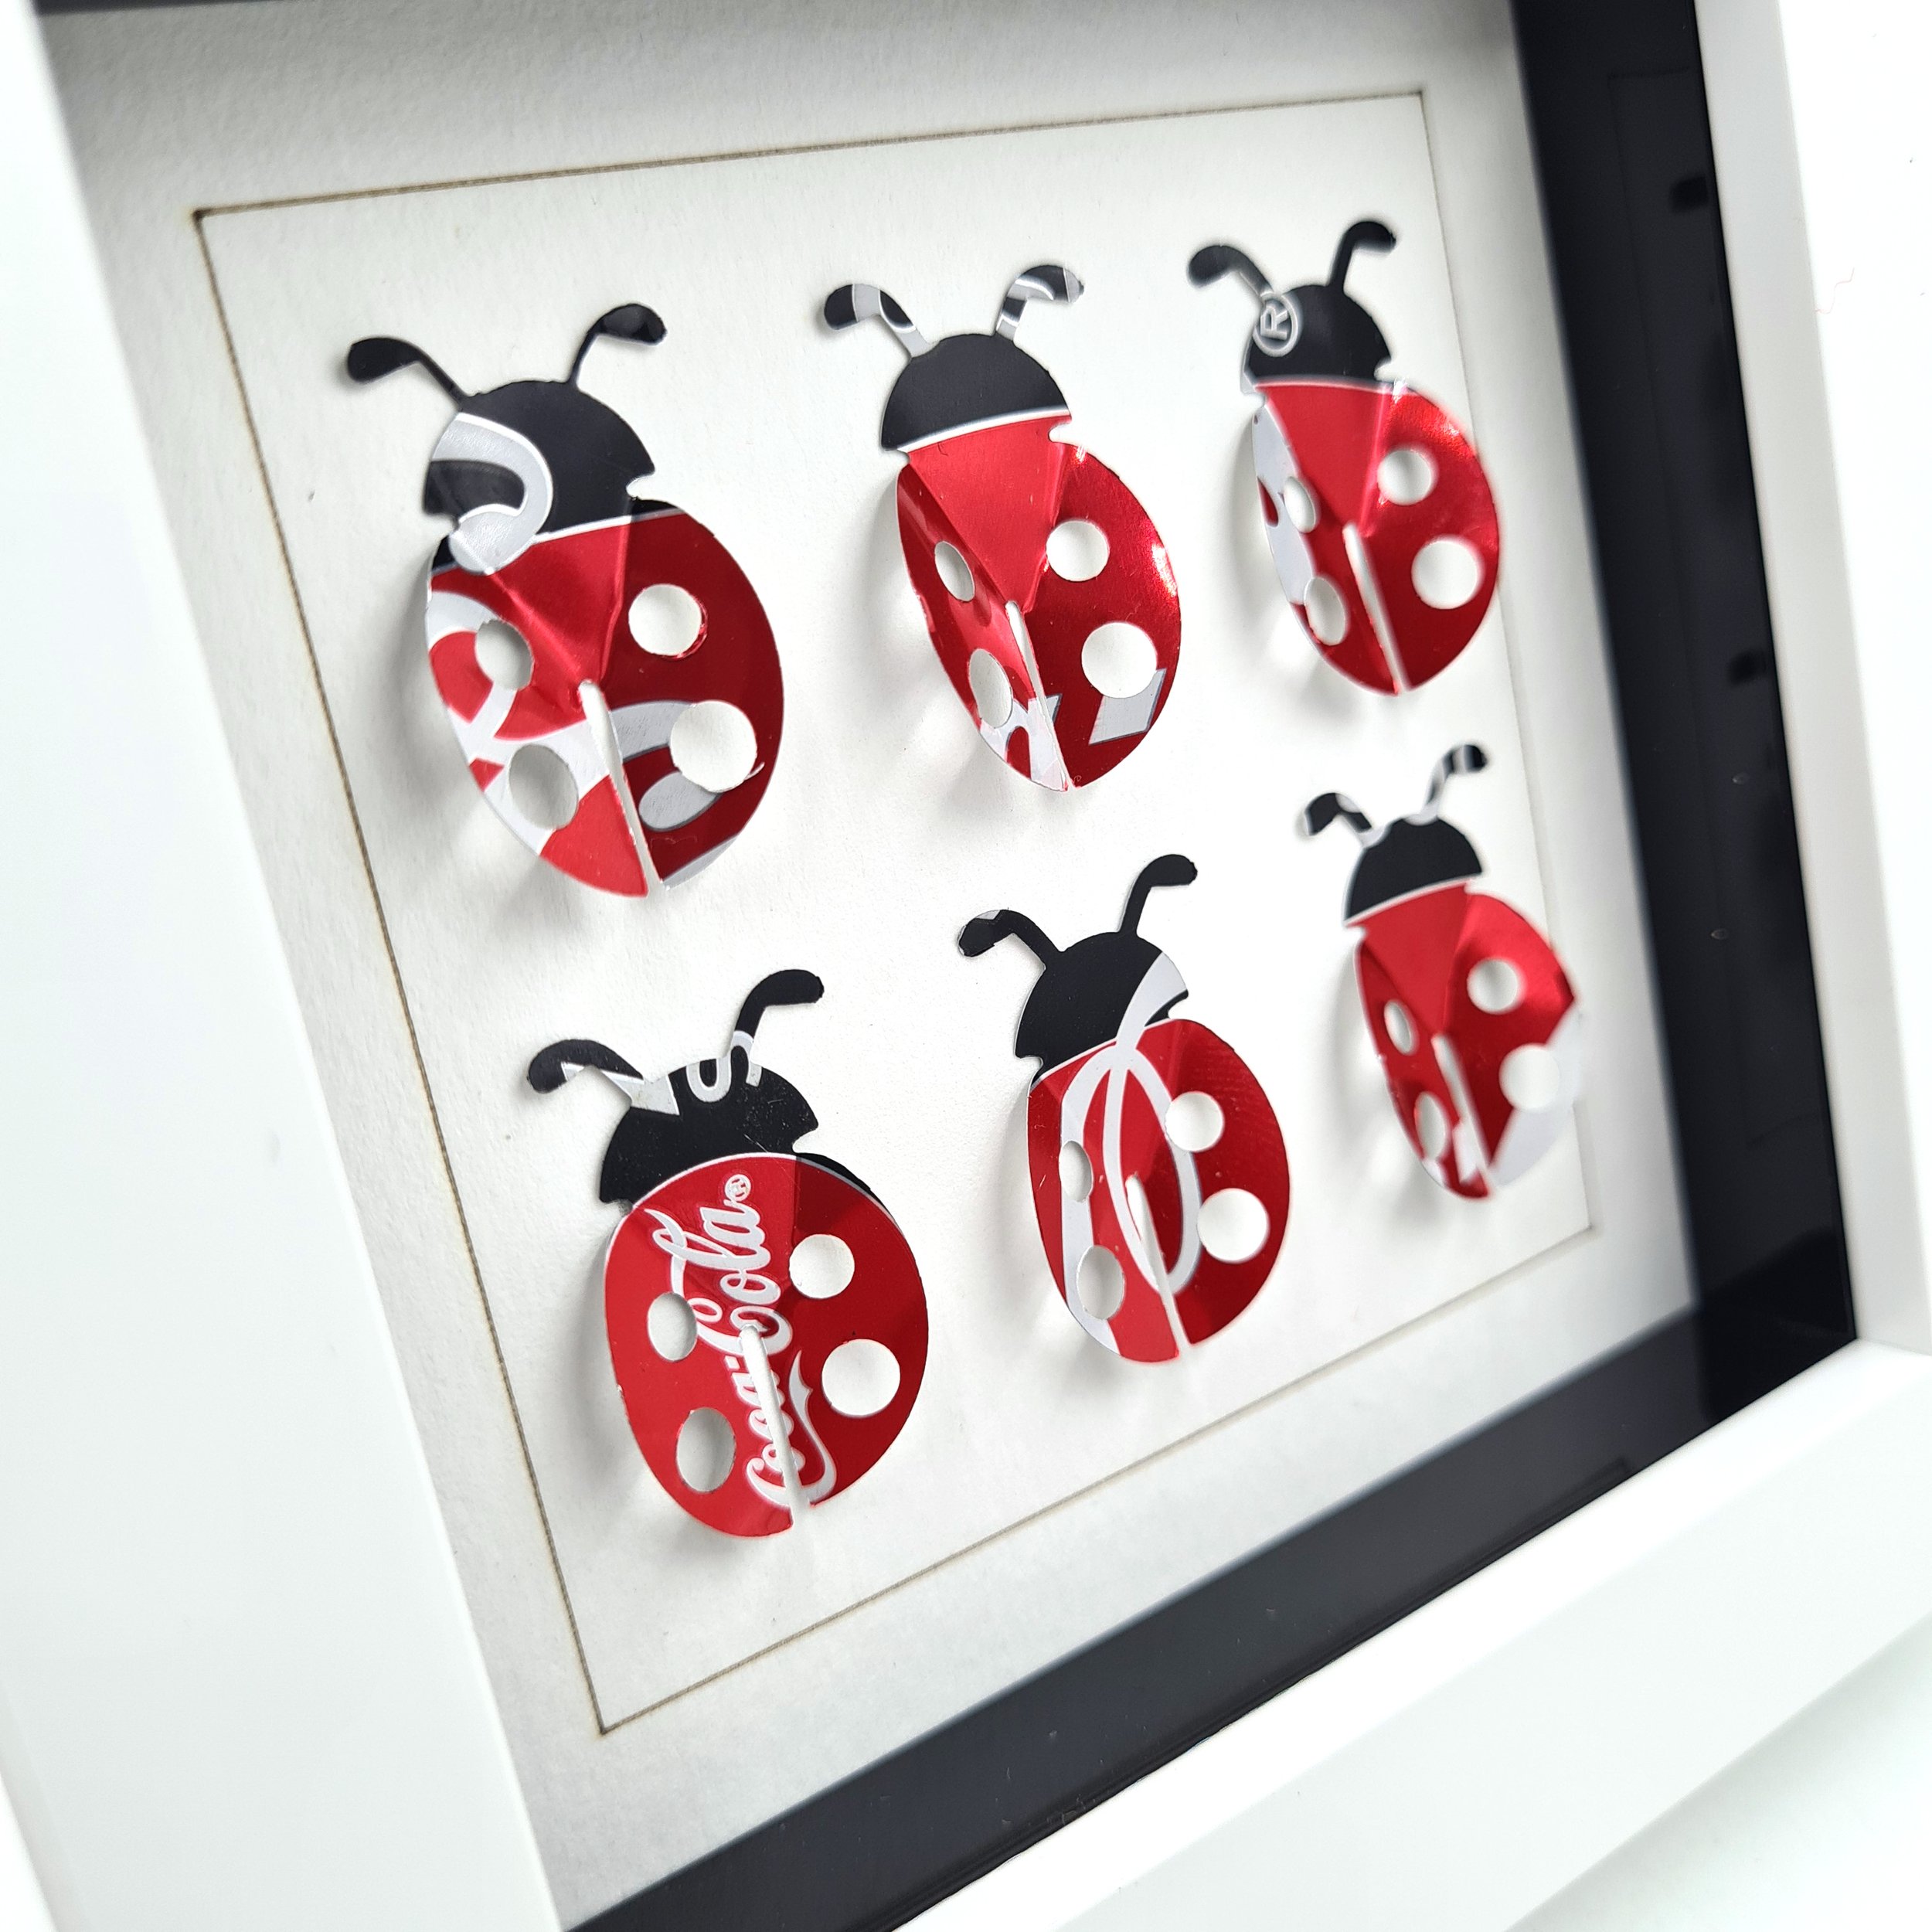 Ladybird upcycled can art white frame close up 2.jpg